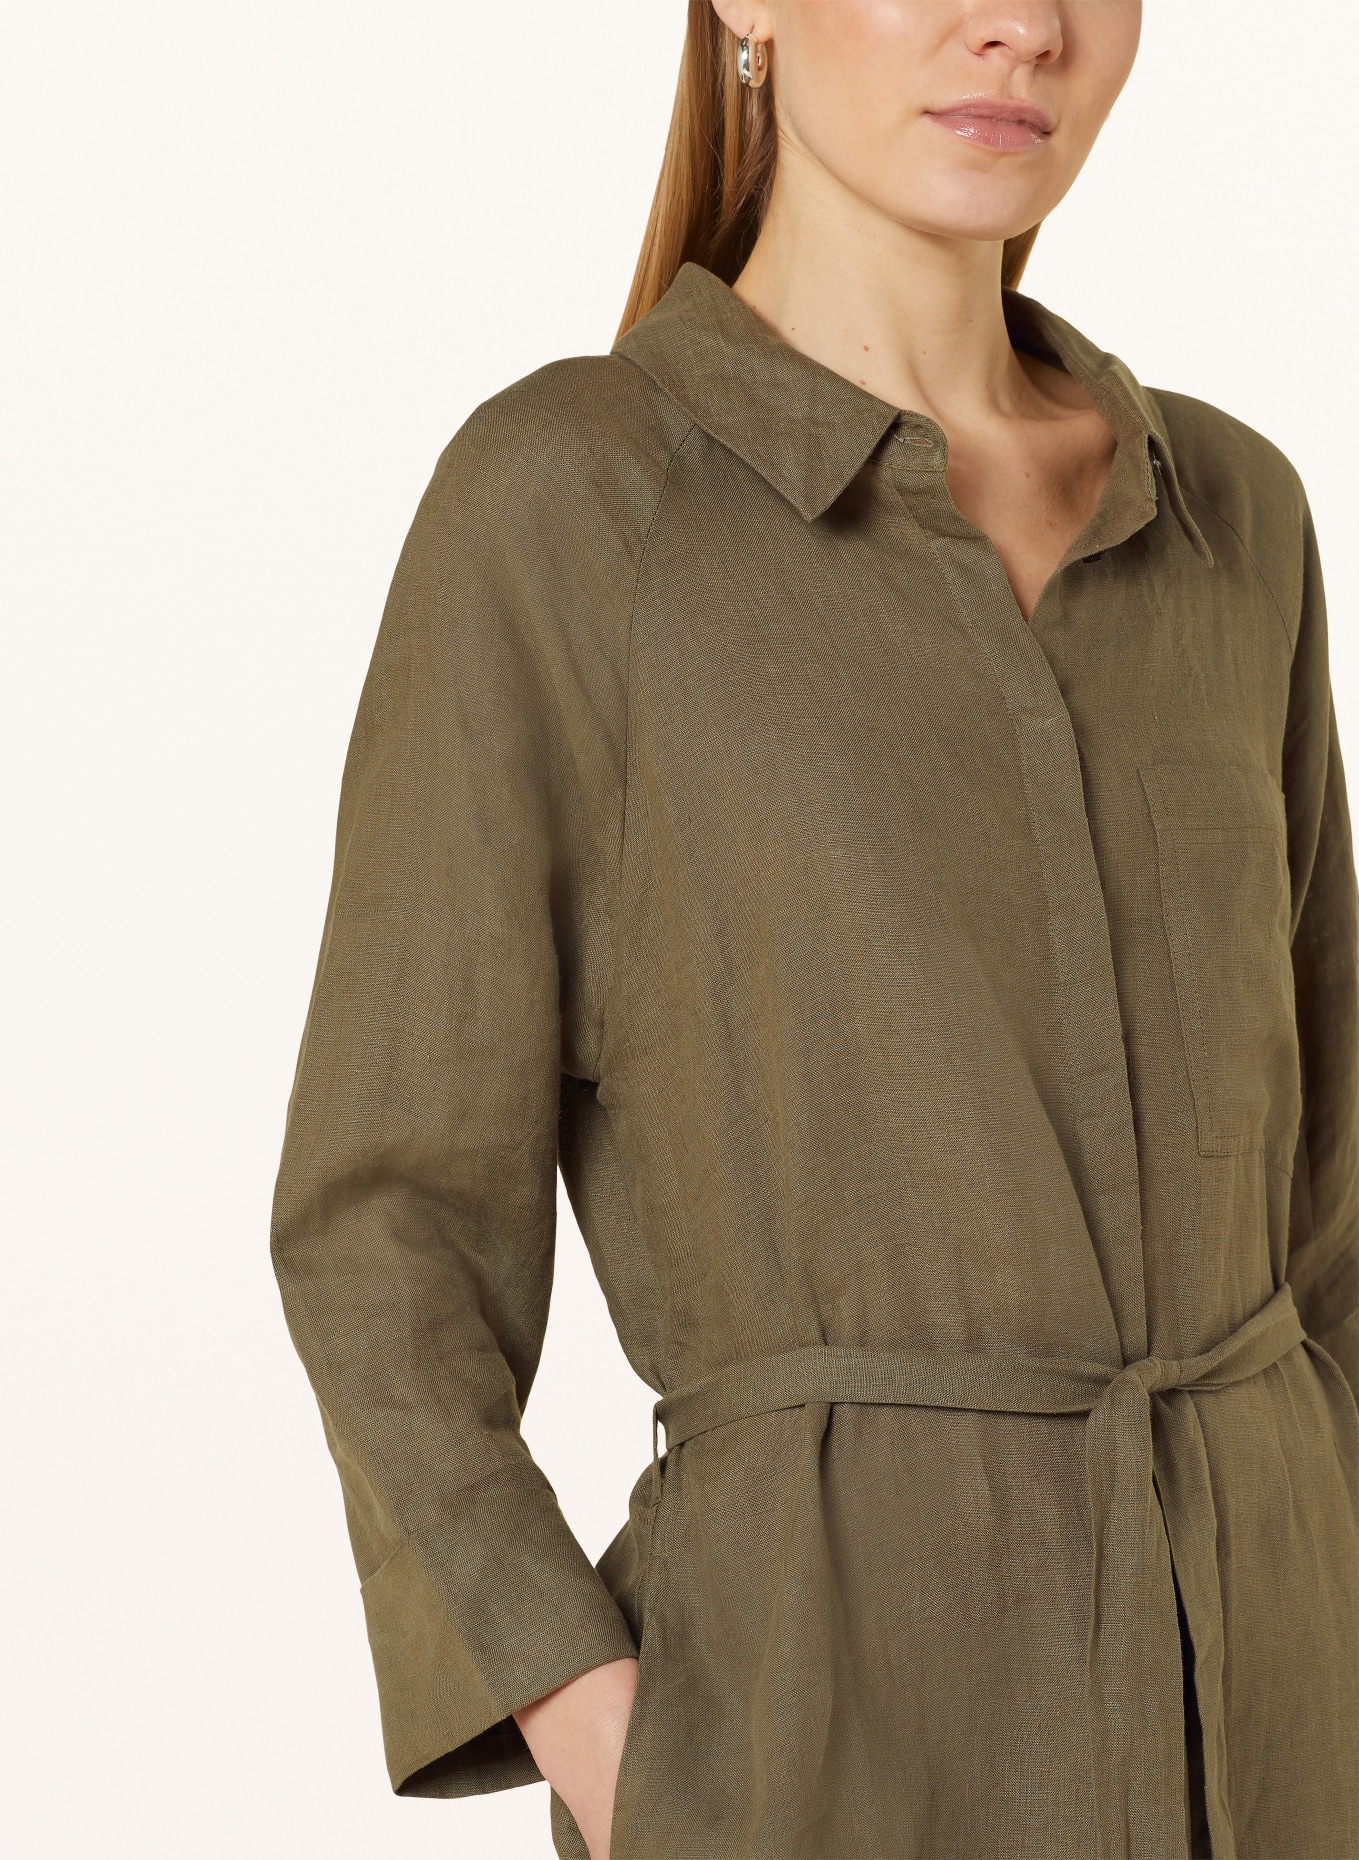 Princess GOES HOLLYWOOD Shirt dress made of linen with 3/4 sleeves, Color: KHAKI (Image 4)